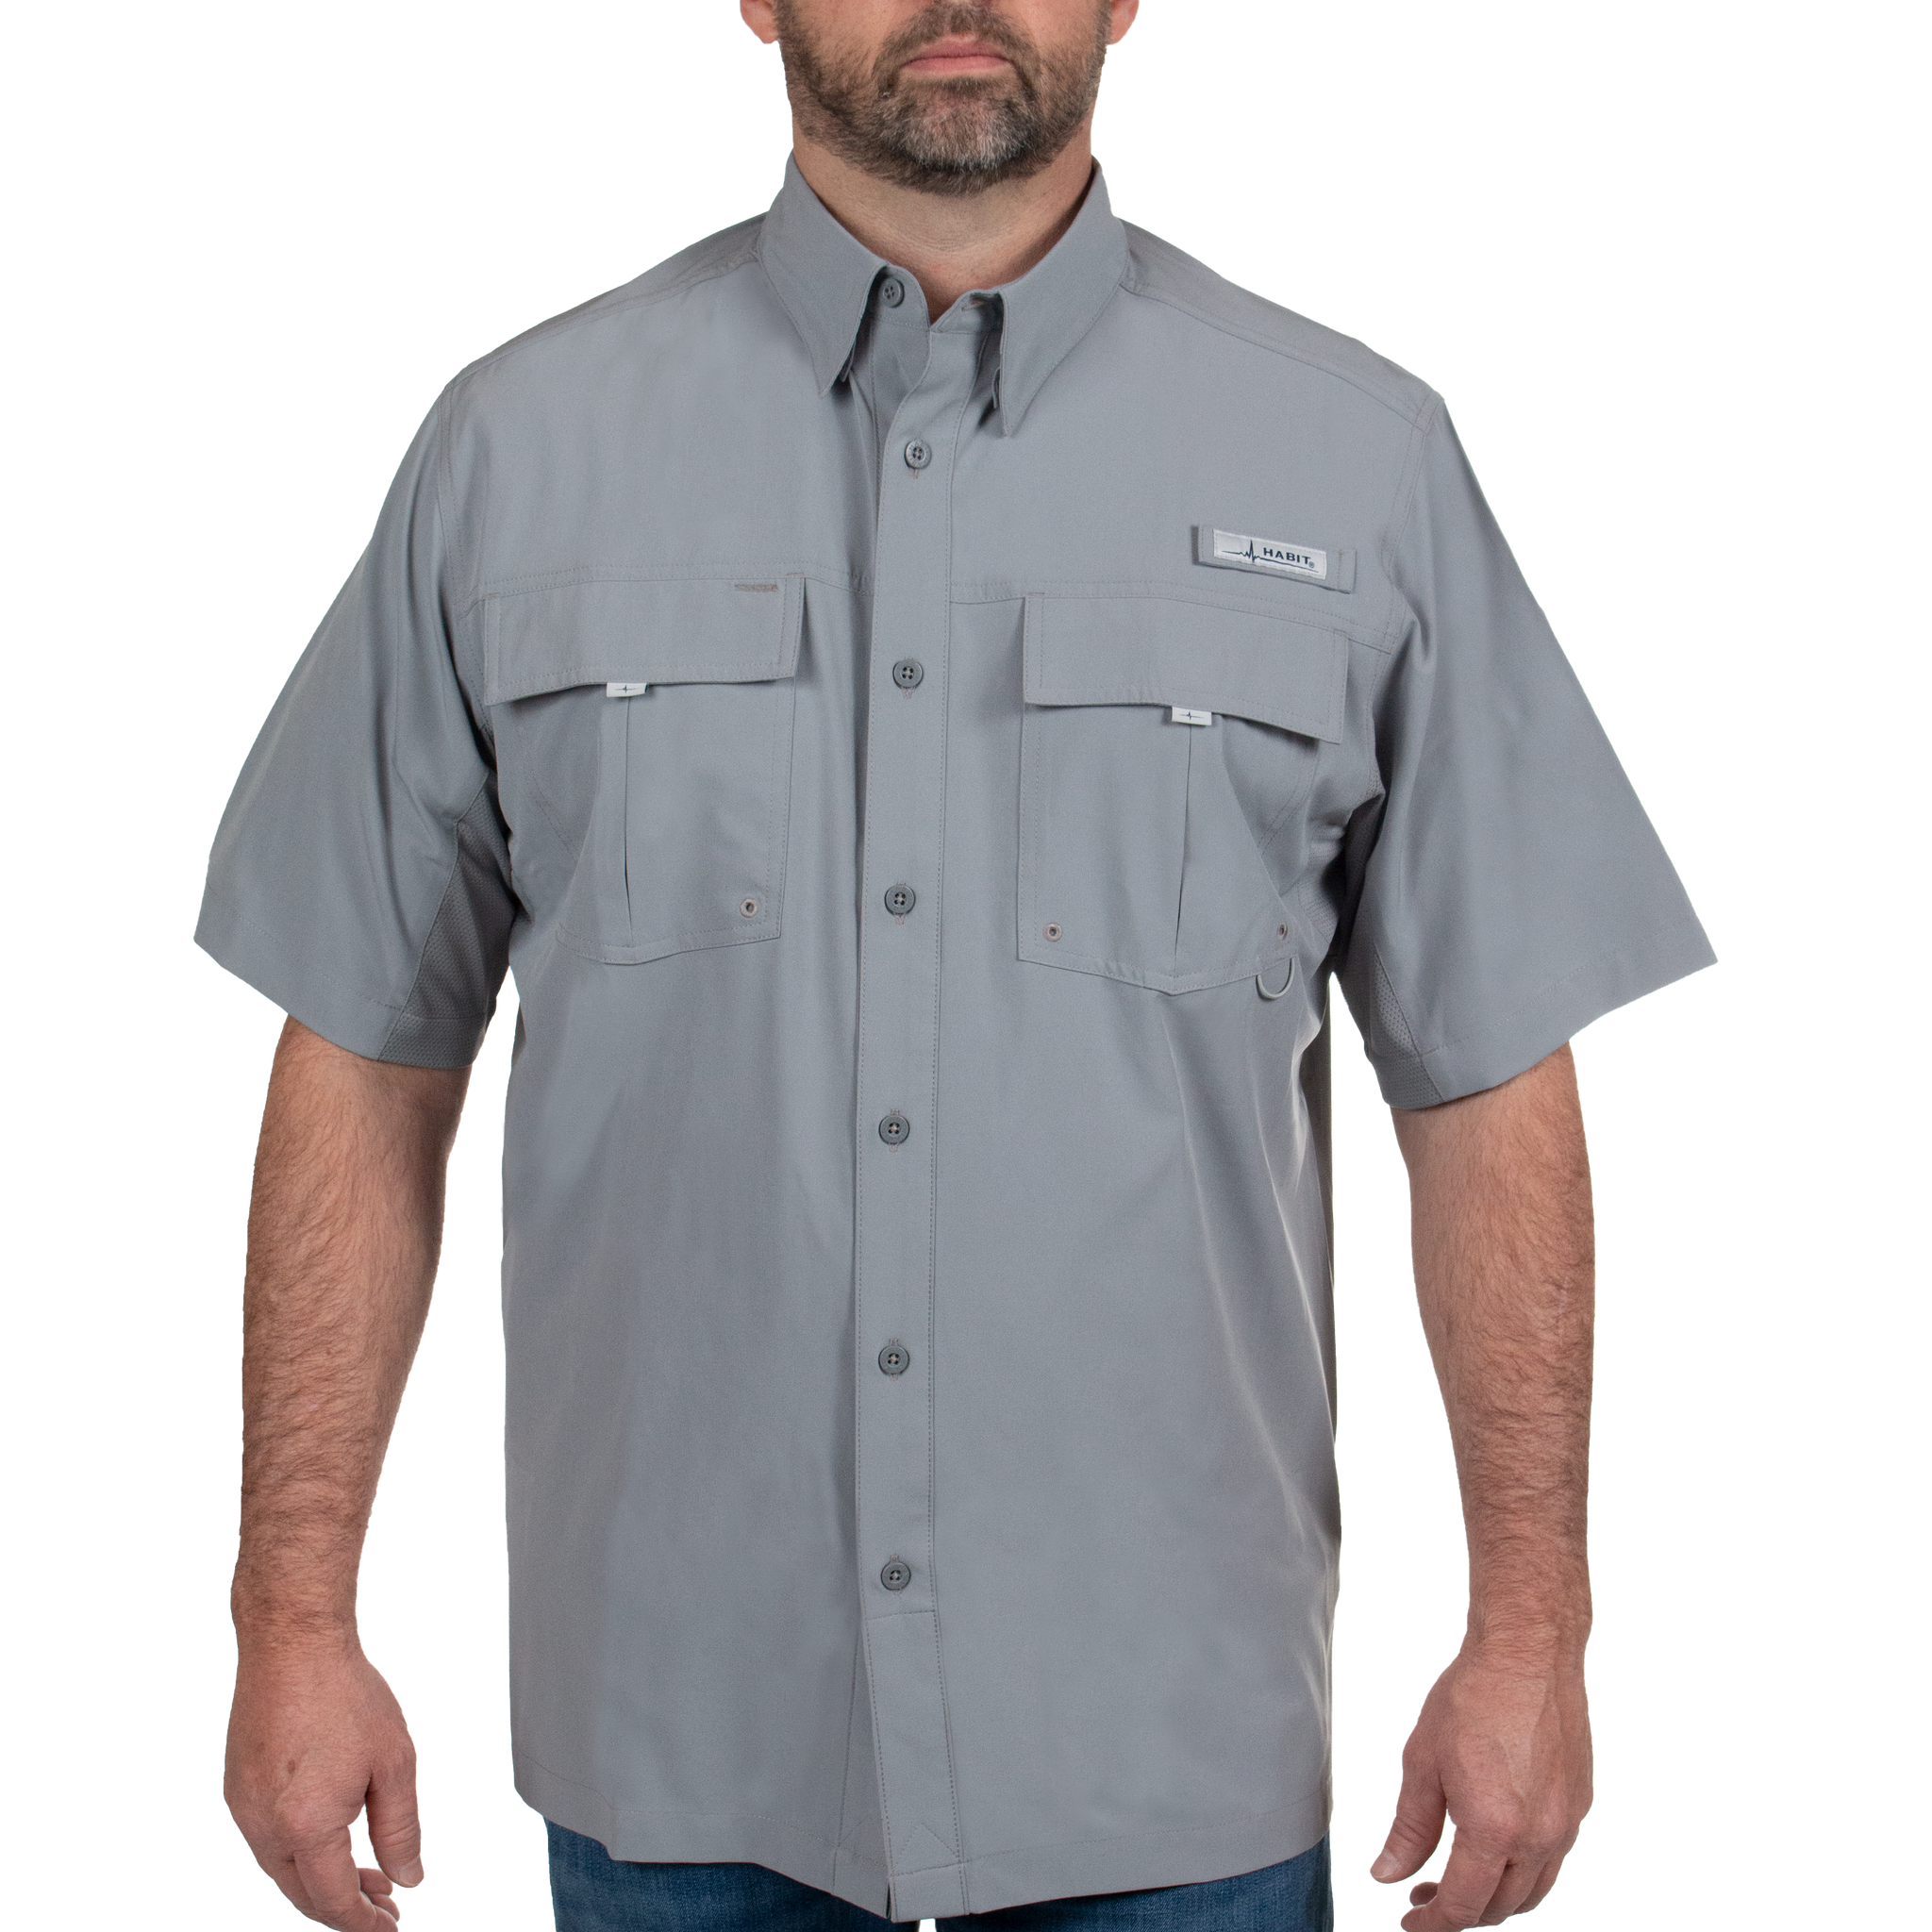 Men’s Forage River Short Sleeve River Guide Fishing Shirt Monument Front